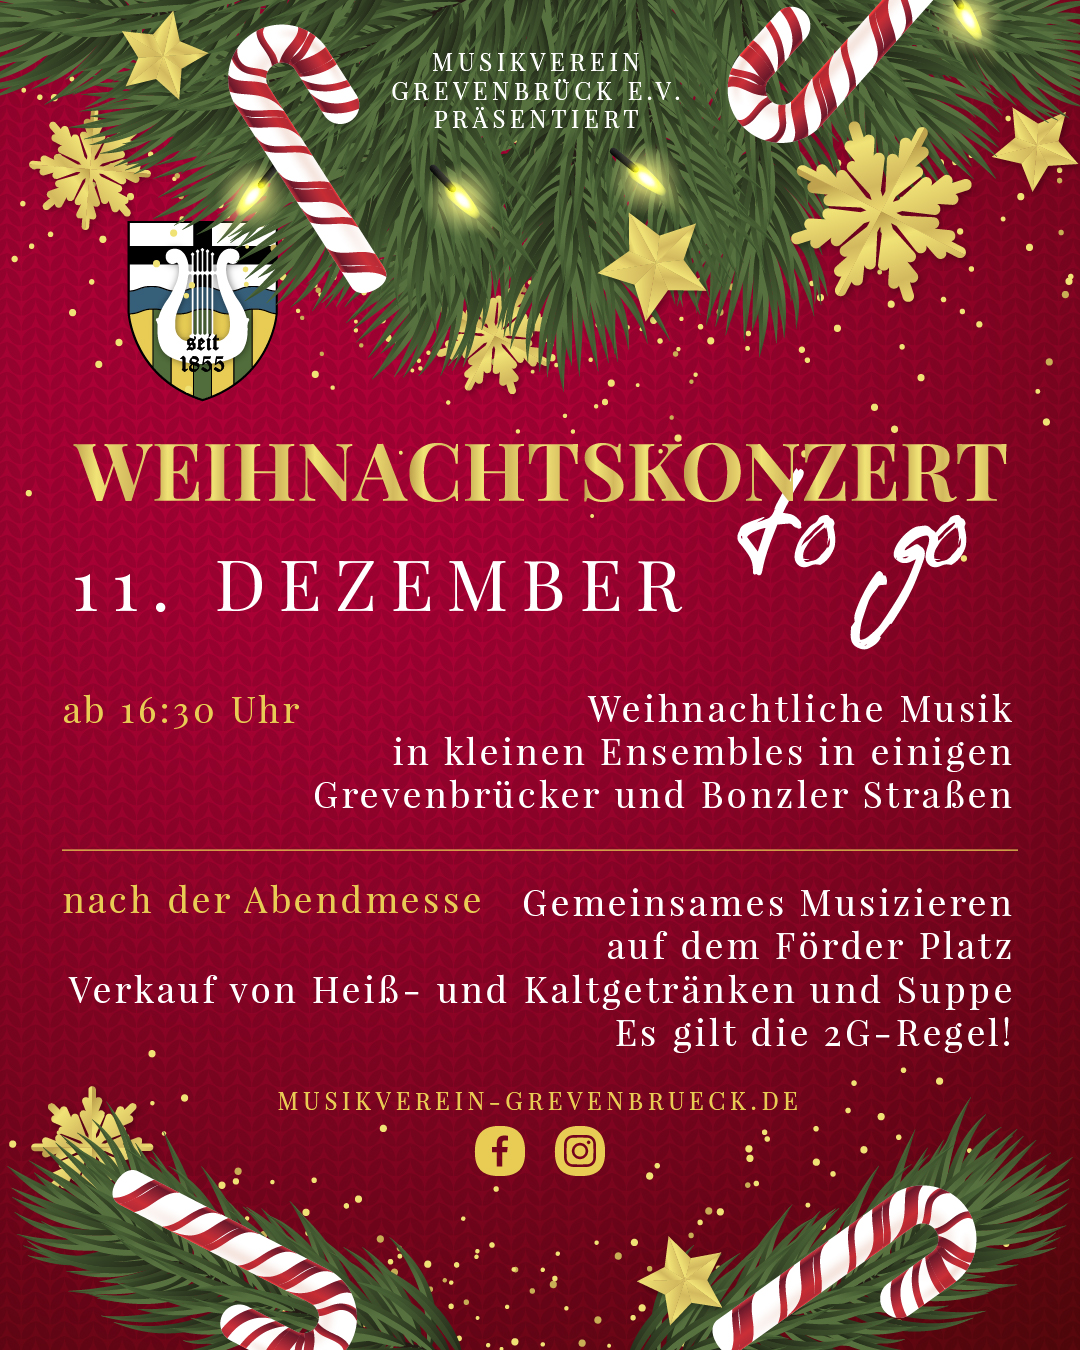 Read more about the article Weihnachtskonzert to go